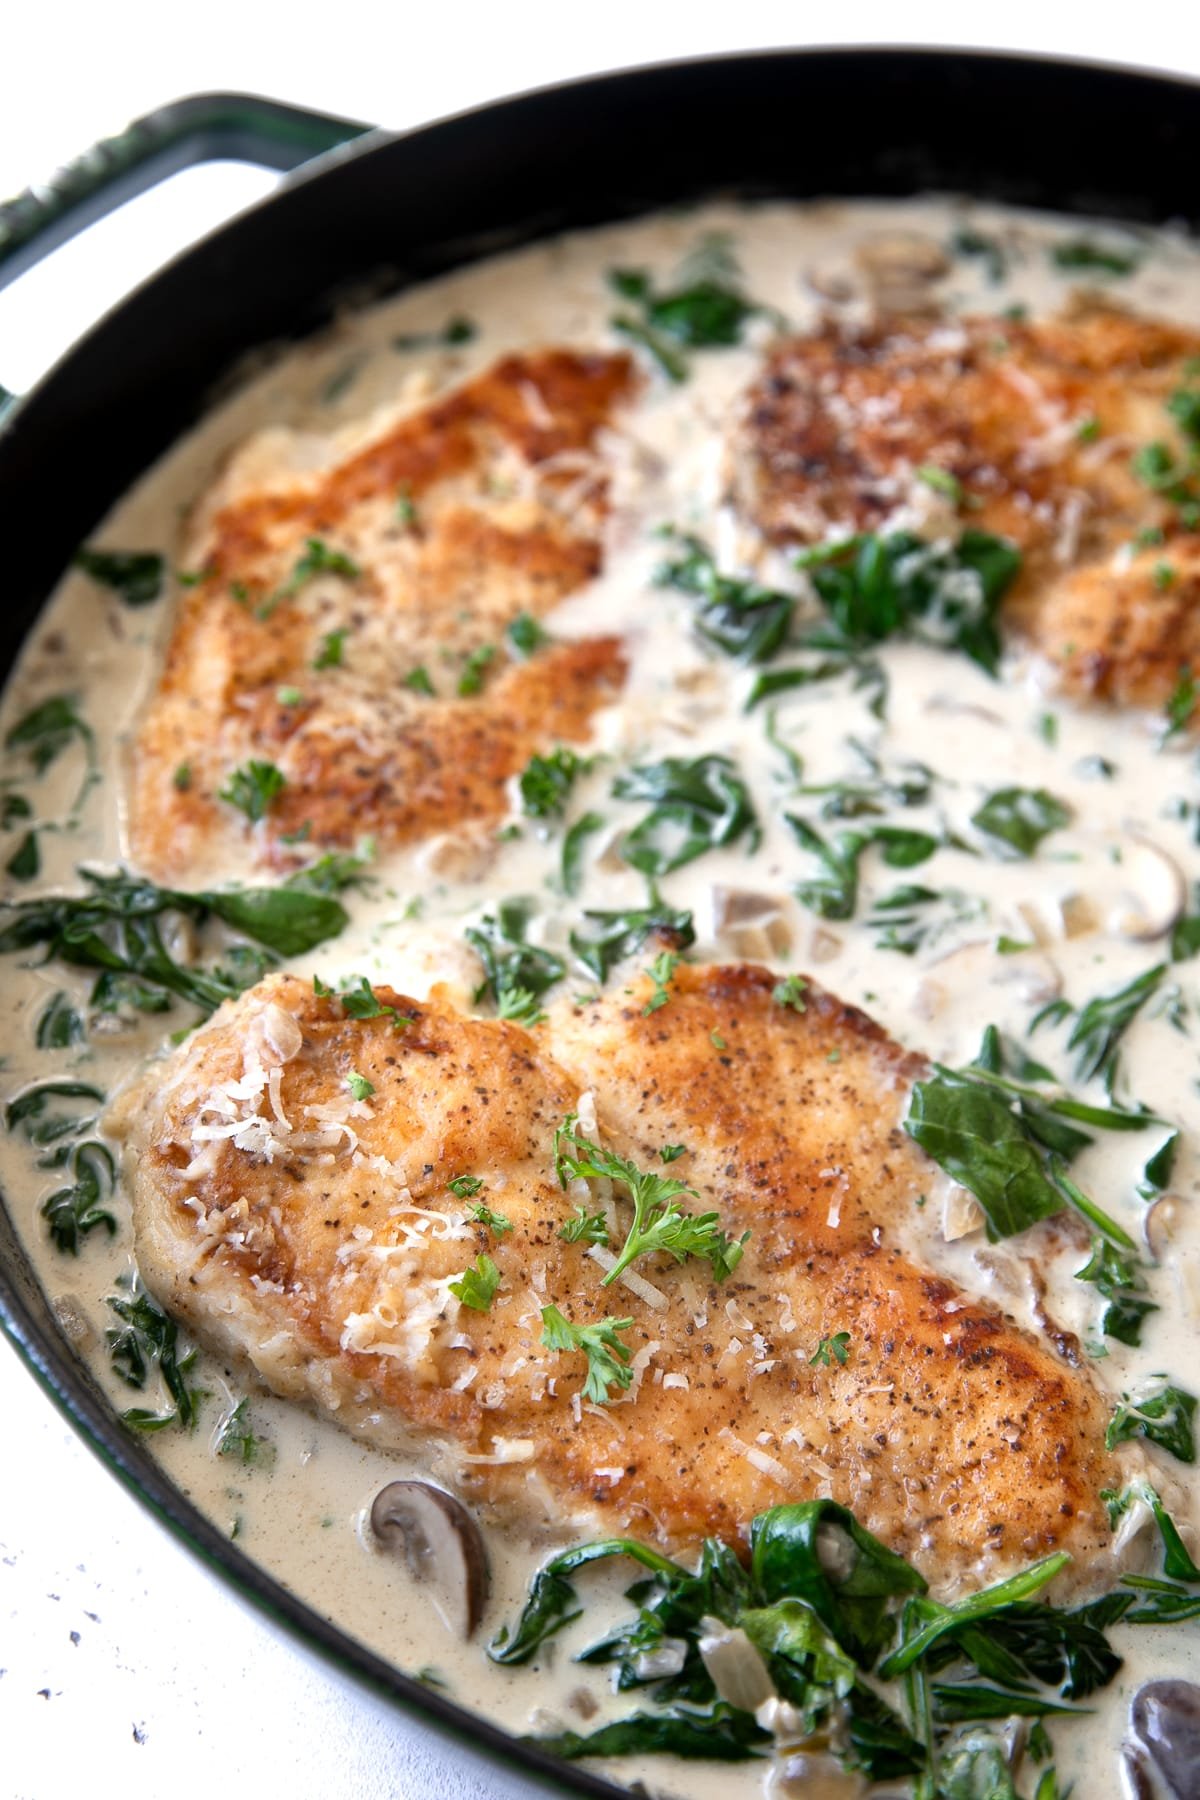 Lightly floured and fried chicken breast in a large skillet filled with a homemade spinach, mushroom, and cream sauce.